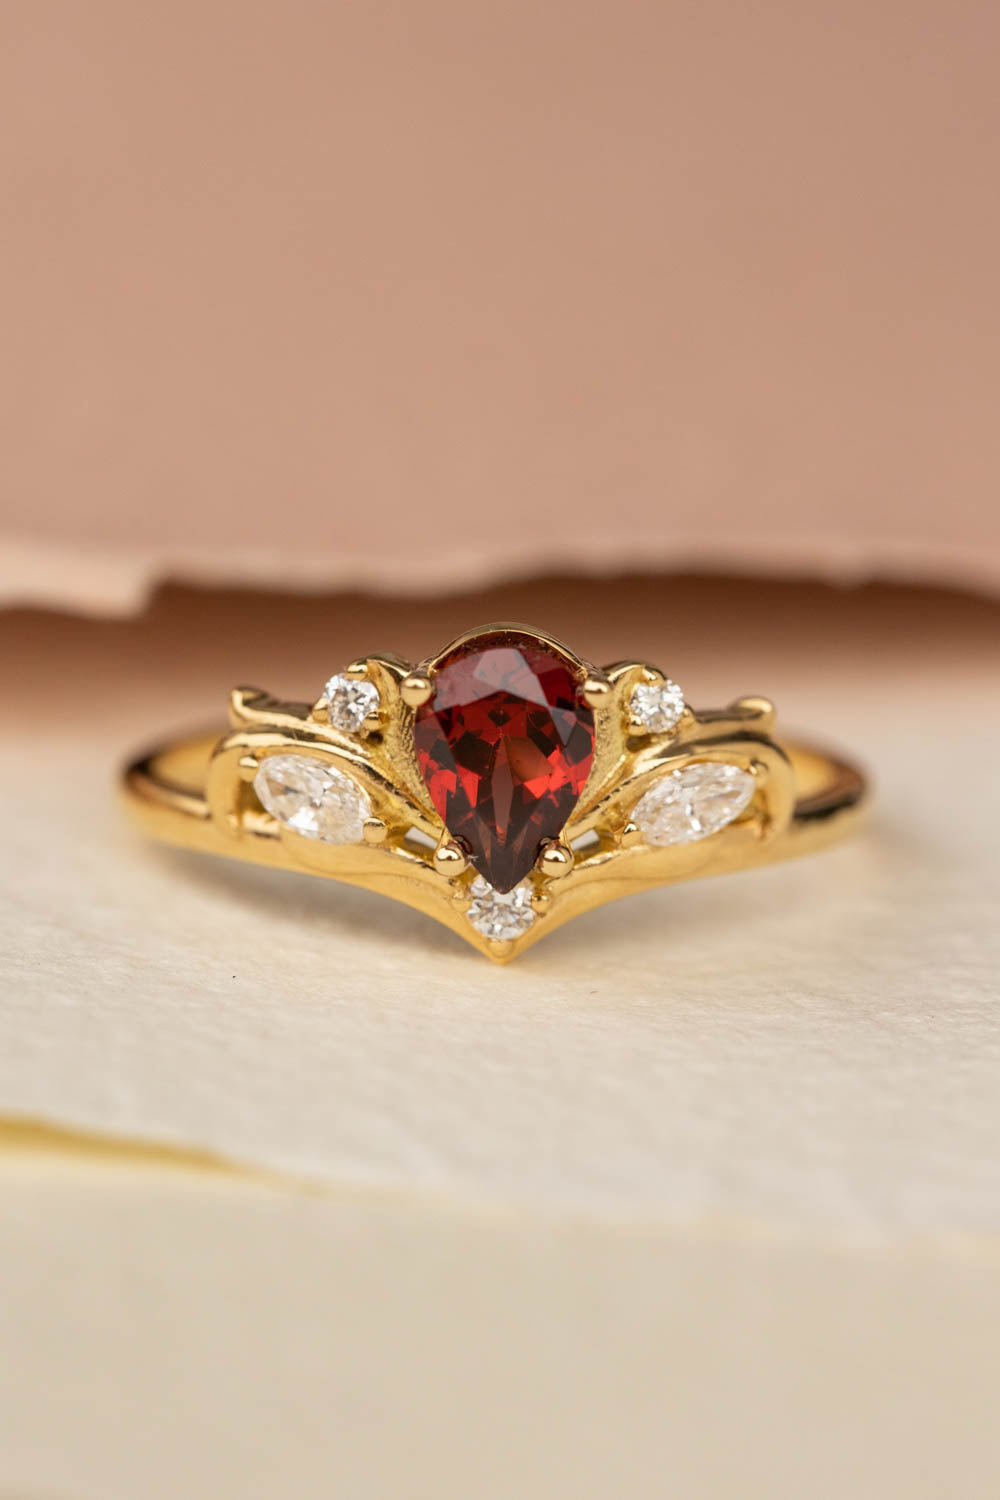 READY TO SHIP: Swanlake ring in 18K yellow gold, natural garnet pear 7x5 mm, natural diamonds, AVAILABLE RING SIZES: 8.5-10.5US - Eden Garden Jewelry™